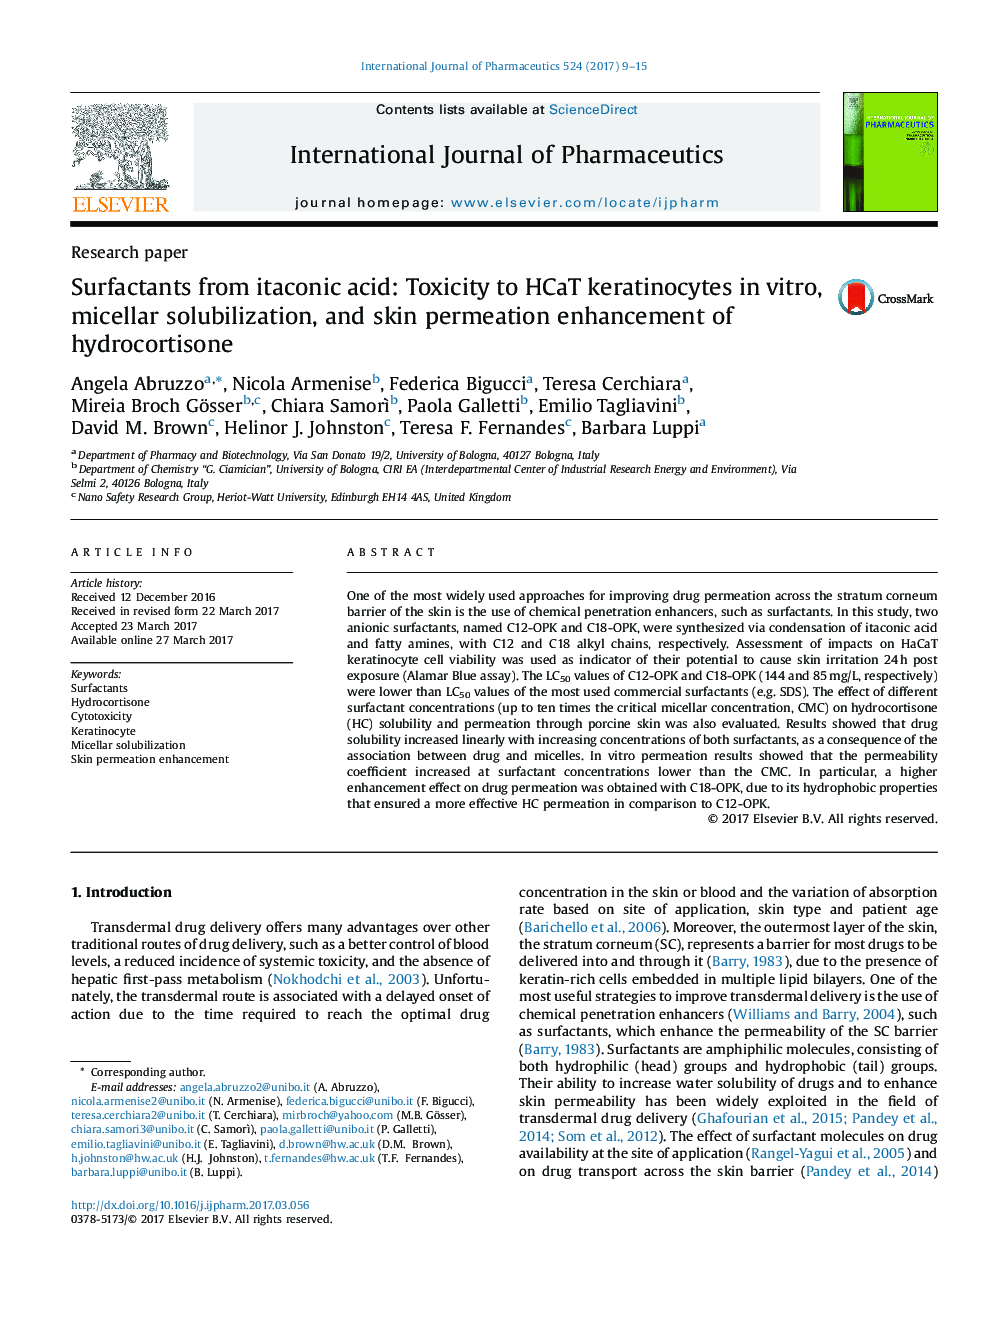 Surfactants from itaconic acid: Toxicity to HaCaT keratinocytes in vitro, micellar solubilization, and skin permeation enhancement of hydrocortisone